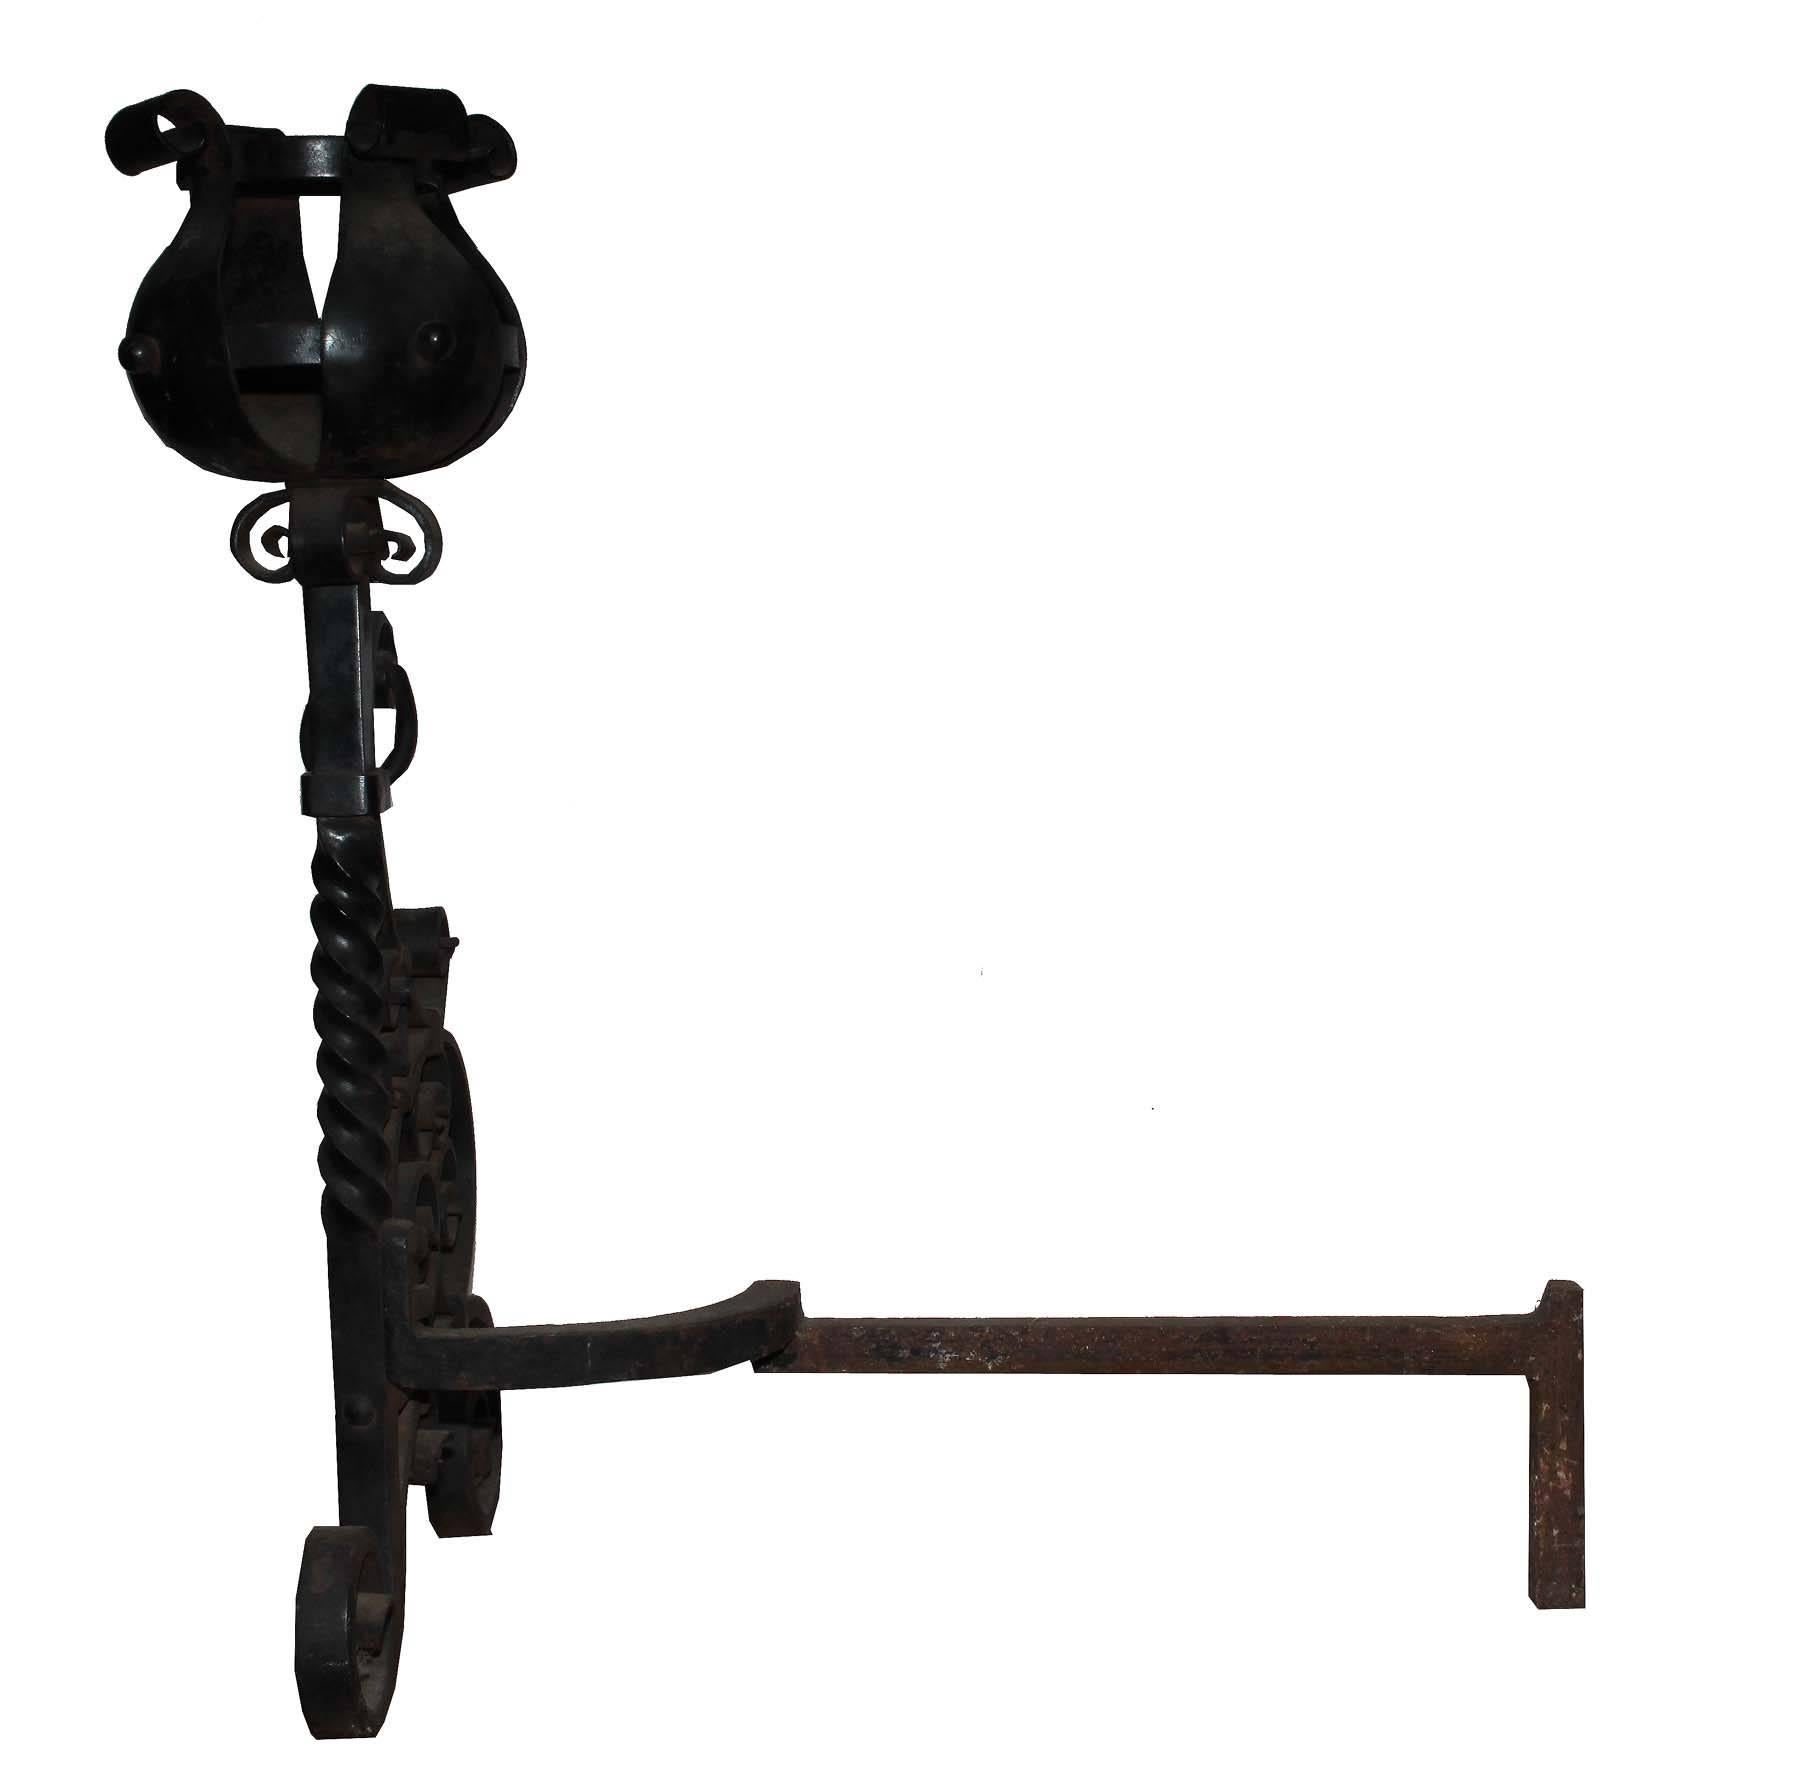 This is a pair of large rod iron andirons from the late 19th century. They are connected by a removable rod iron chain. The hand crafted iron work has amazing details. The scale is very impressive and the attention to detail is present throughout